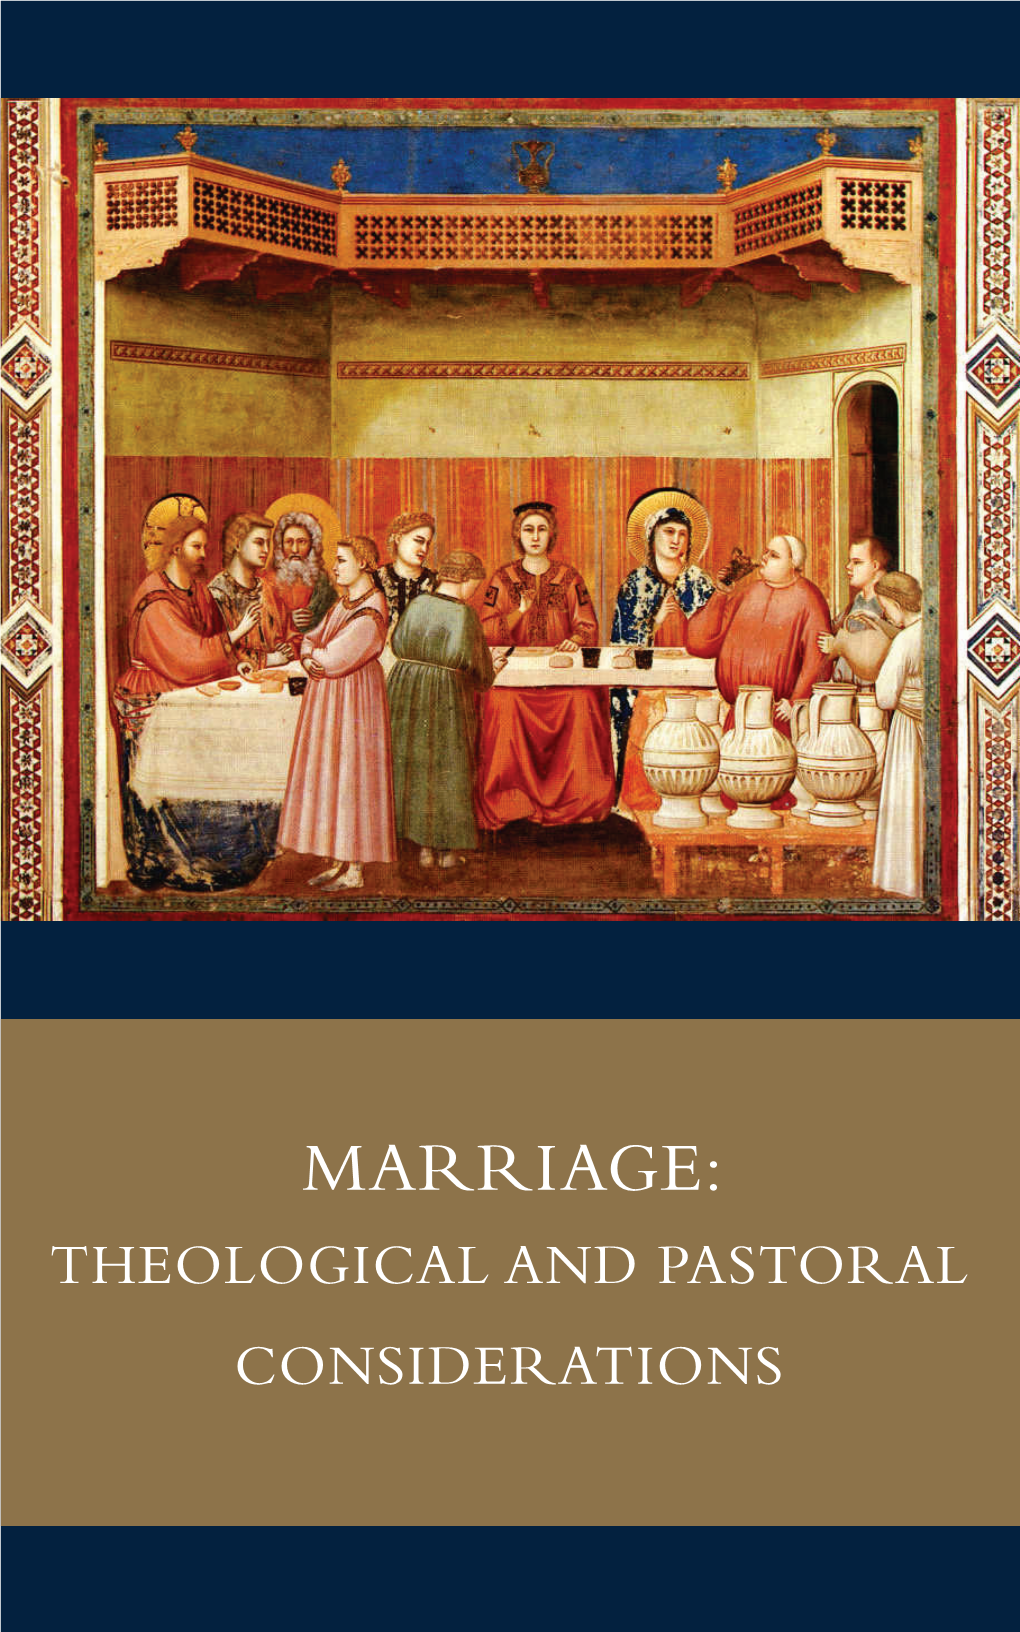 MARRIAGE: THEOLOGICAL and PASTORAL CONSIDERATIONS Cover Image: Giotto Di Bondone, Scenes from the Life of Christ: Marriage at Cana (1304–06)